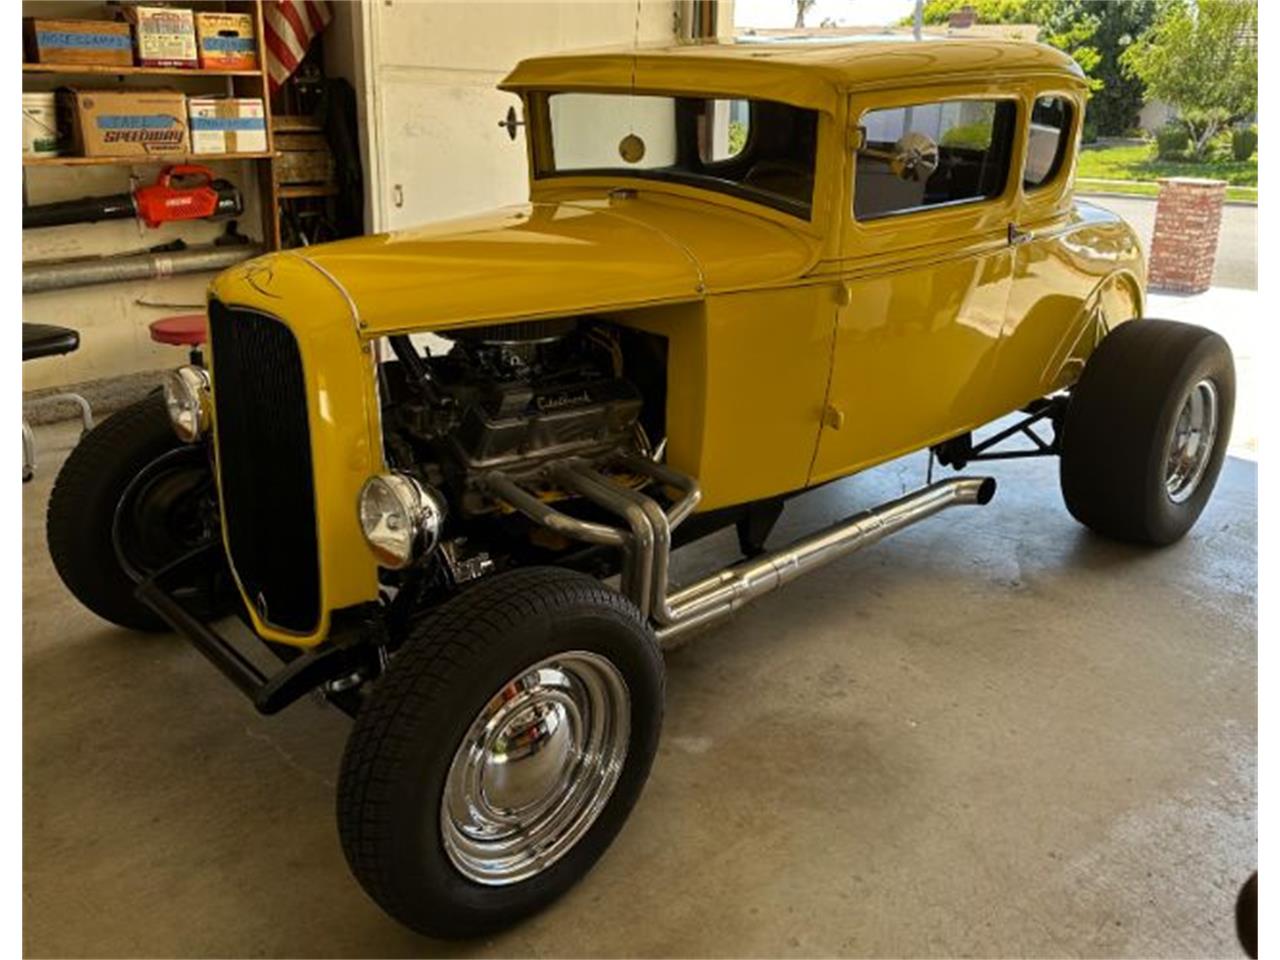 For Sale: 1931 Ford Model A in Cadillac, Michigan for sale in Cadillac, MI